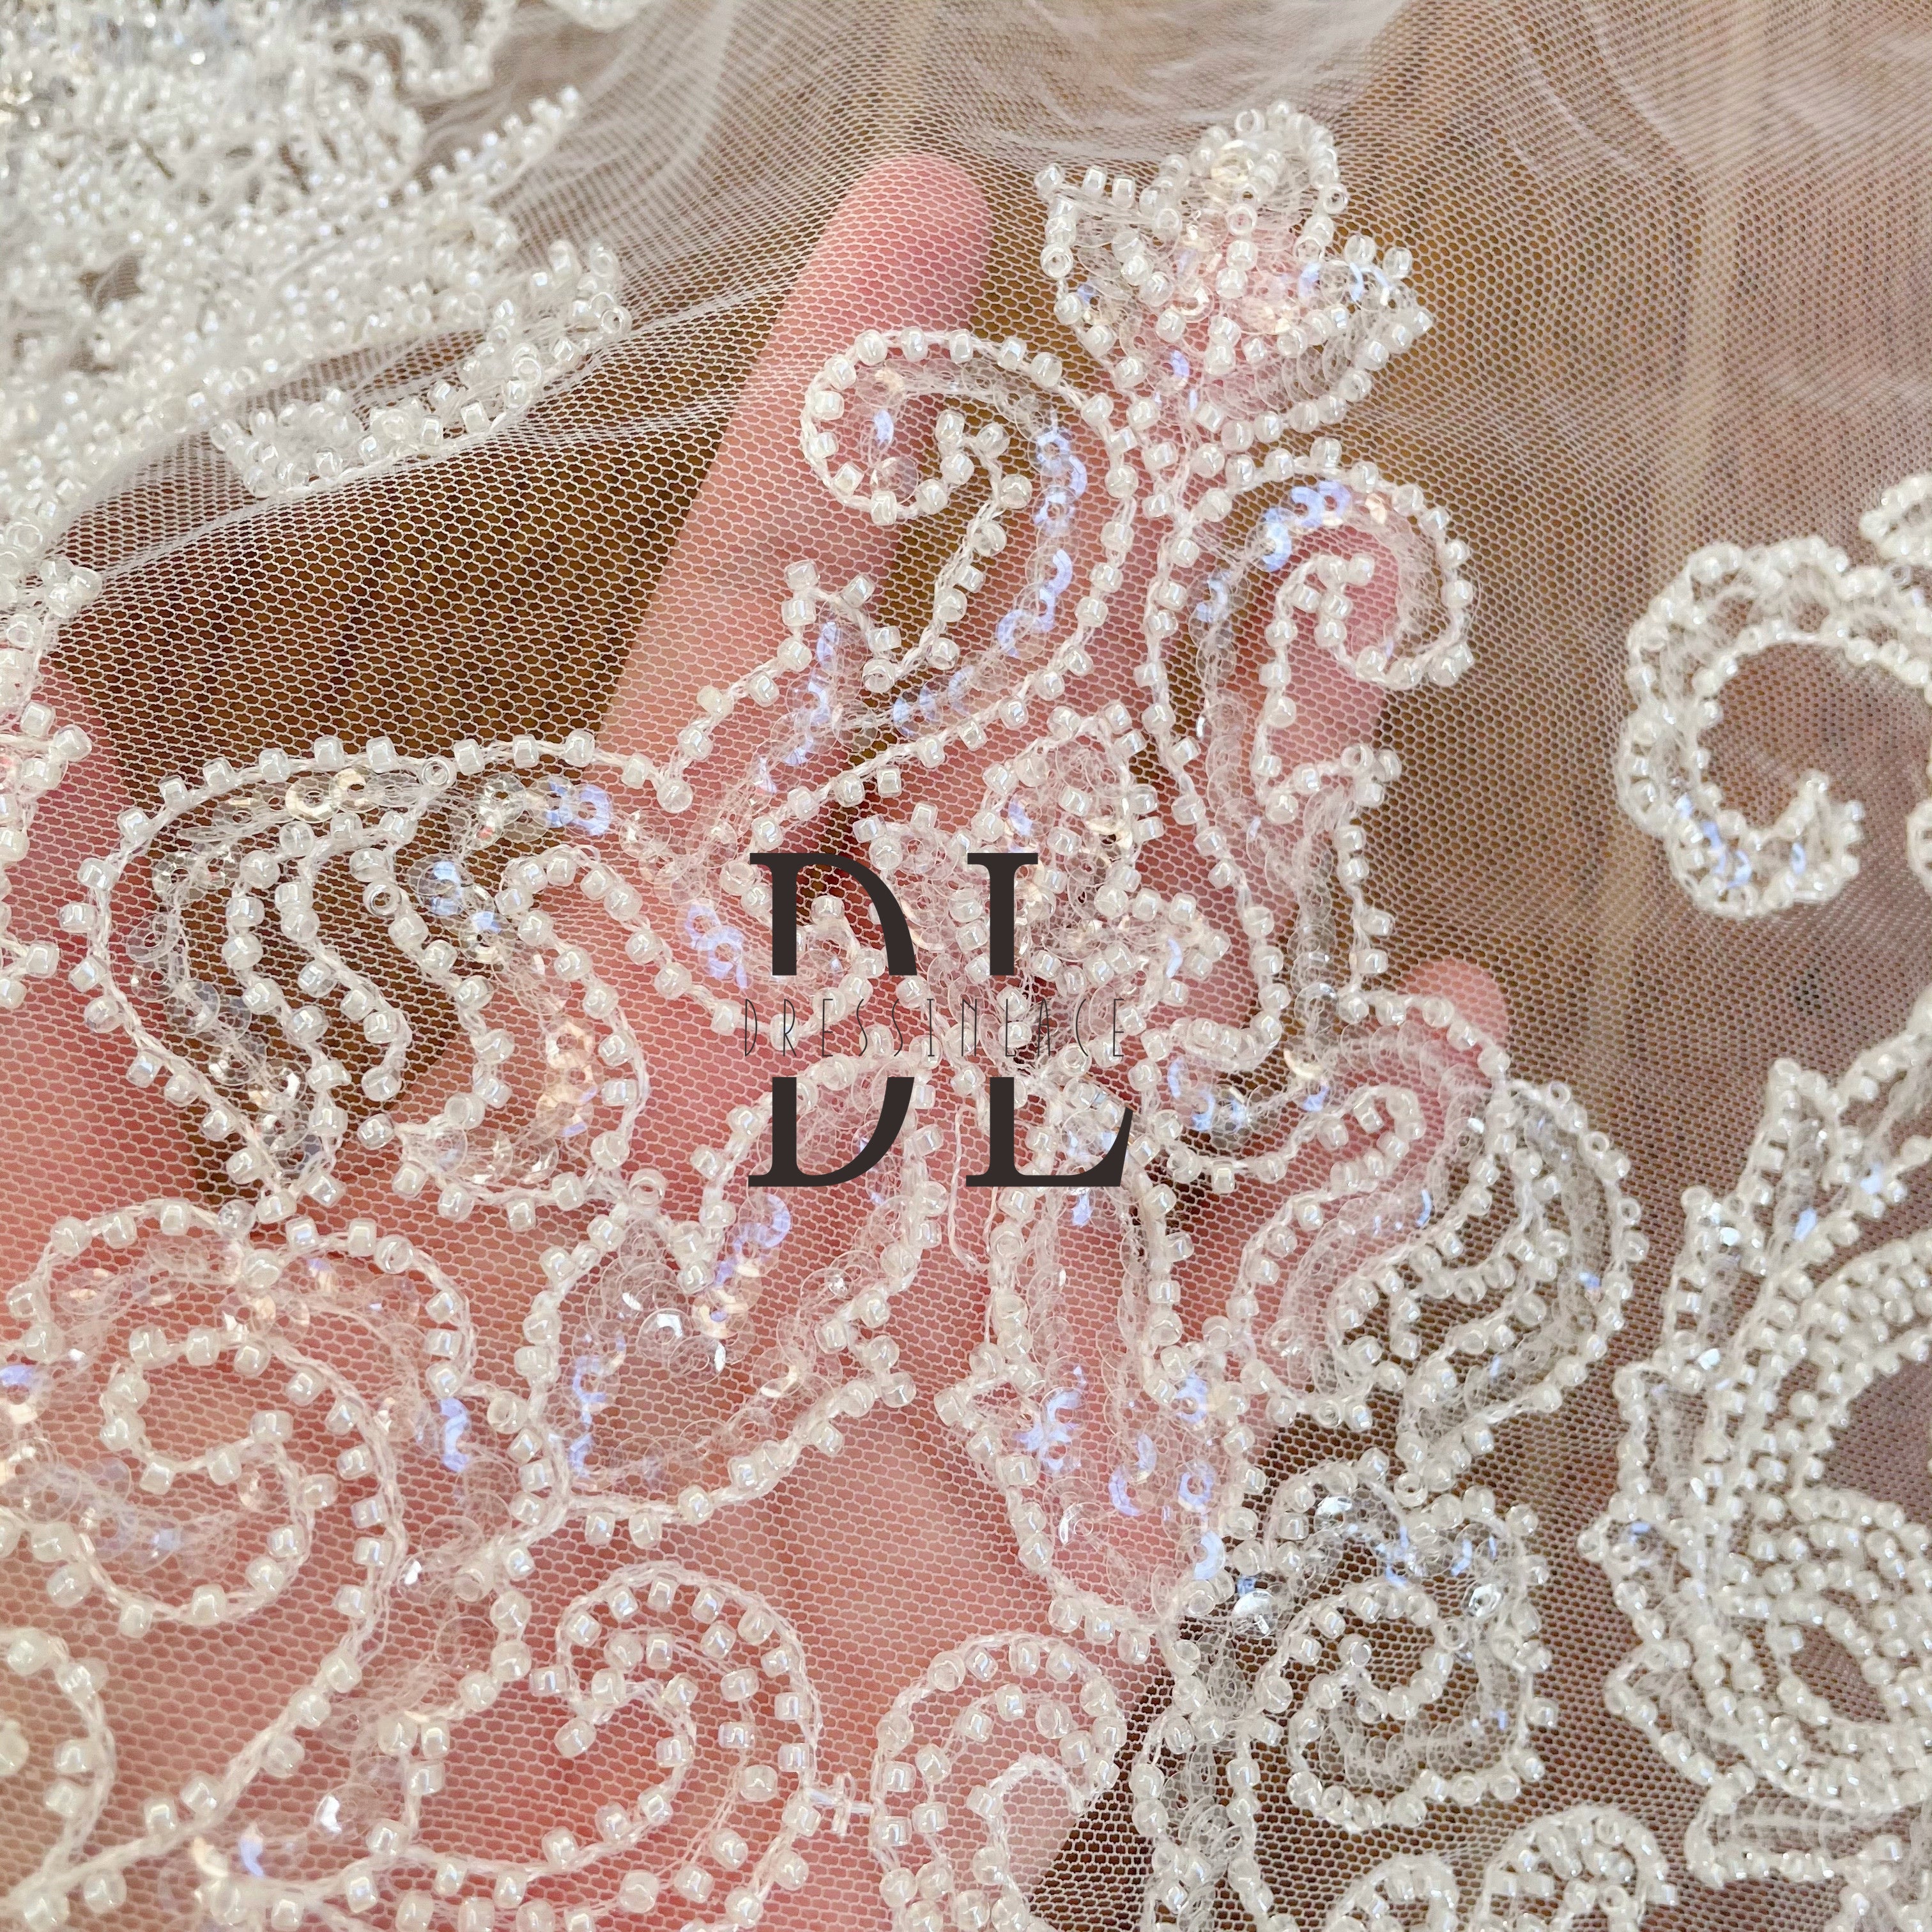 DL130009 Elegant Embroidery Lace Fabric with Stunning Wedding Dress Design DL130009